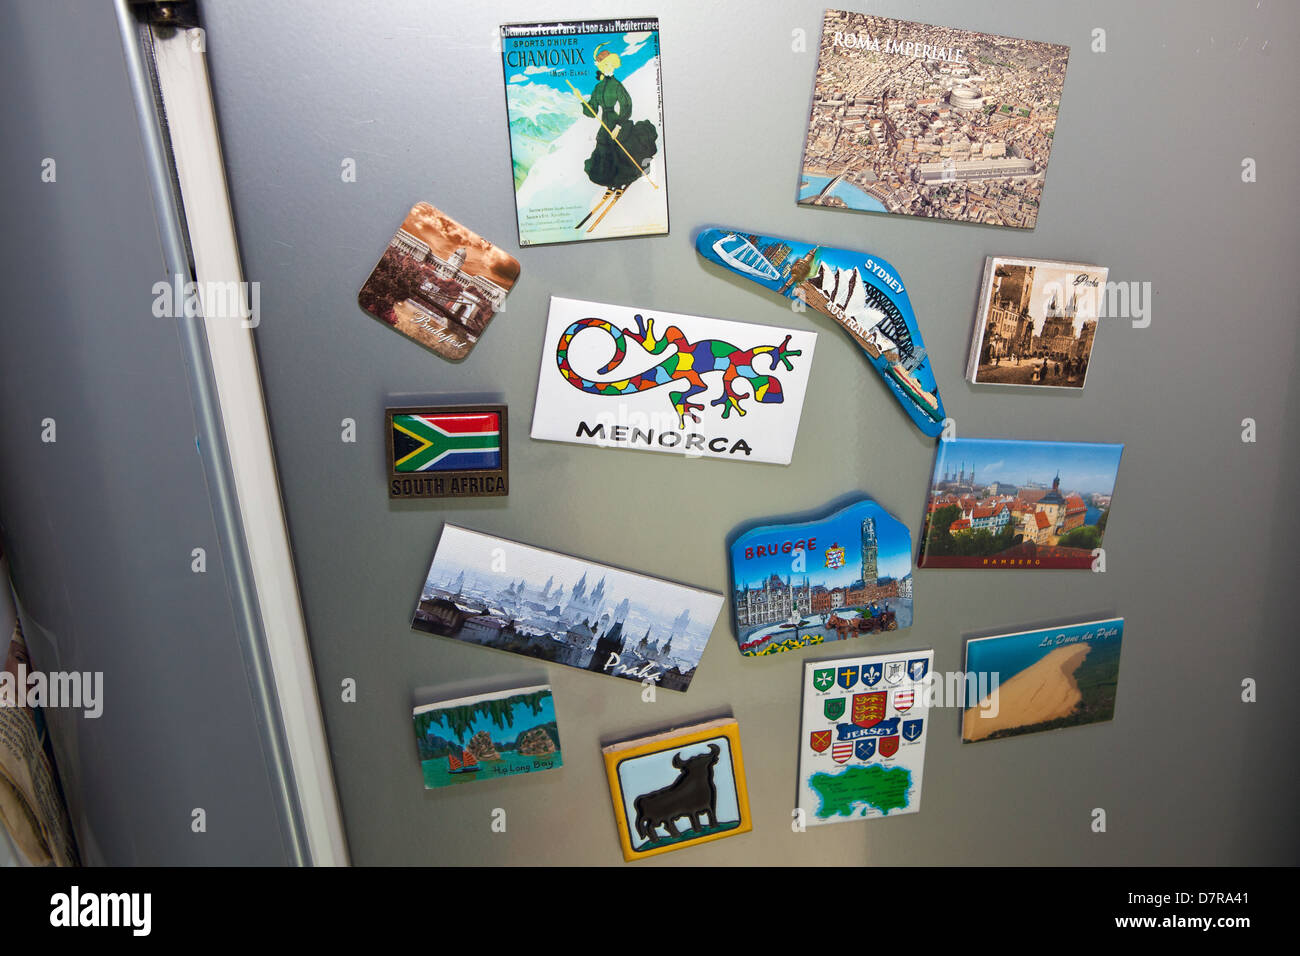 Fridge Magnet Hi Res Stock Photography And Images Alamy